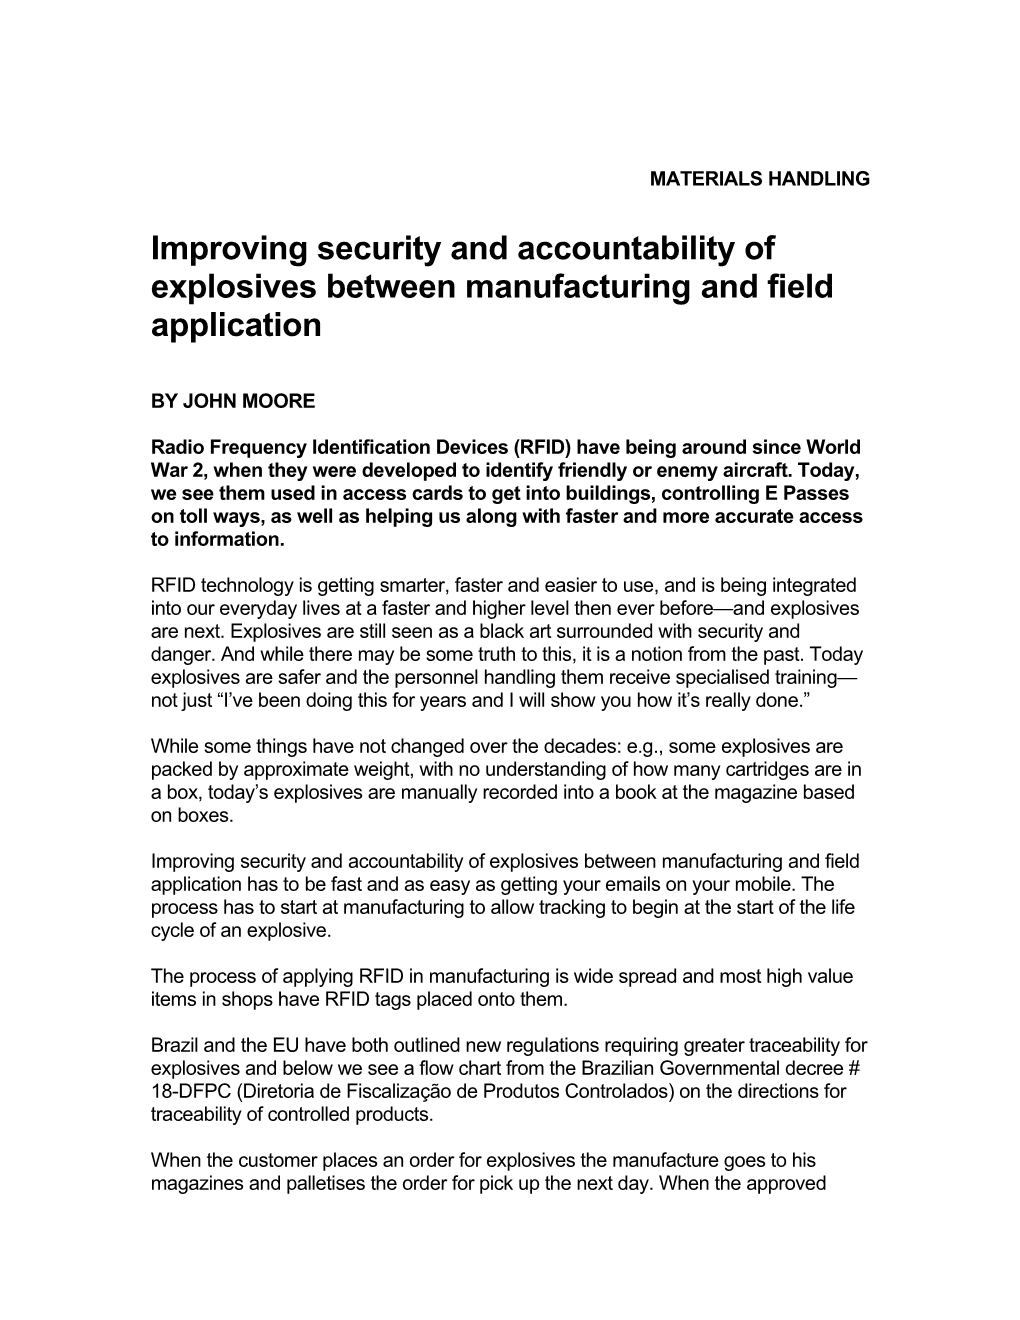 Improving Security and Accountability of Explosives Between Manufacturing and Field Application